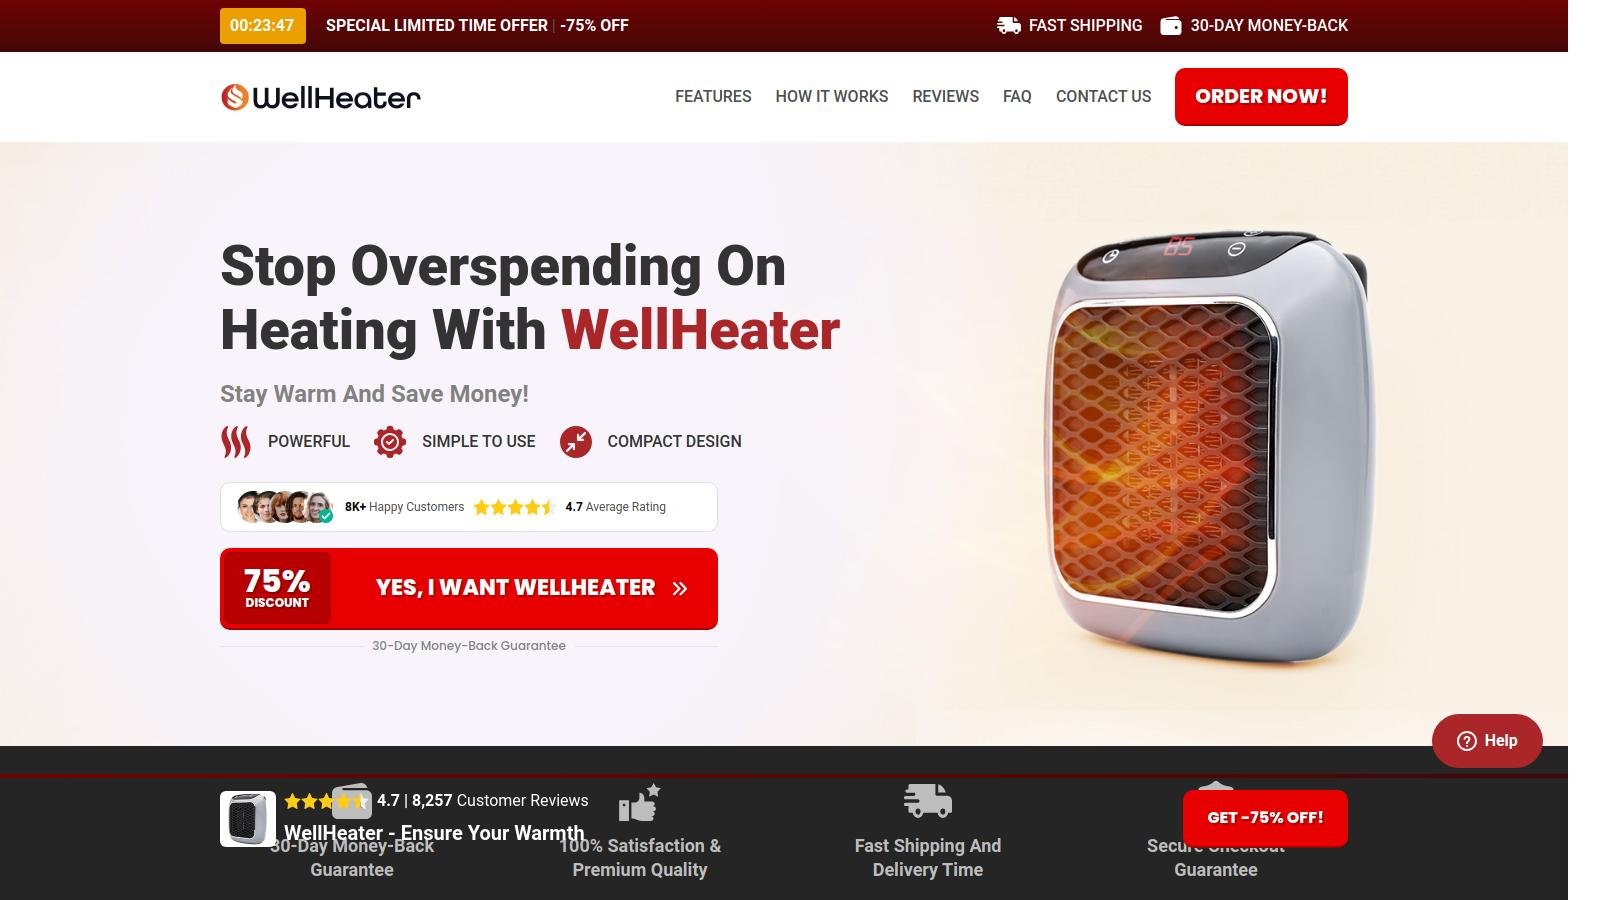 Is Wellheater a Scam Heating Device?